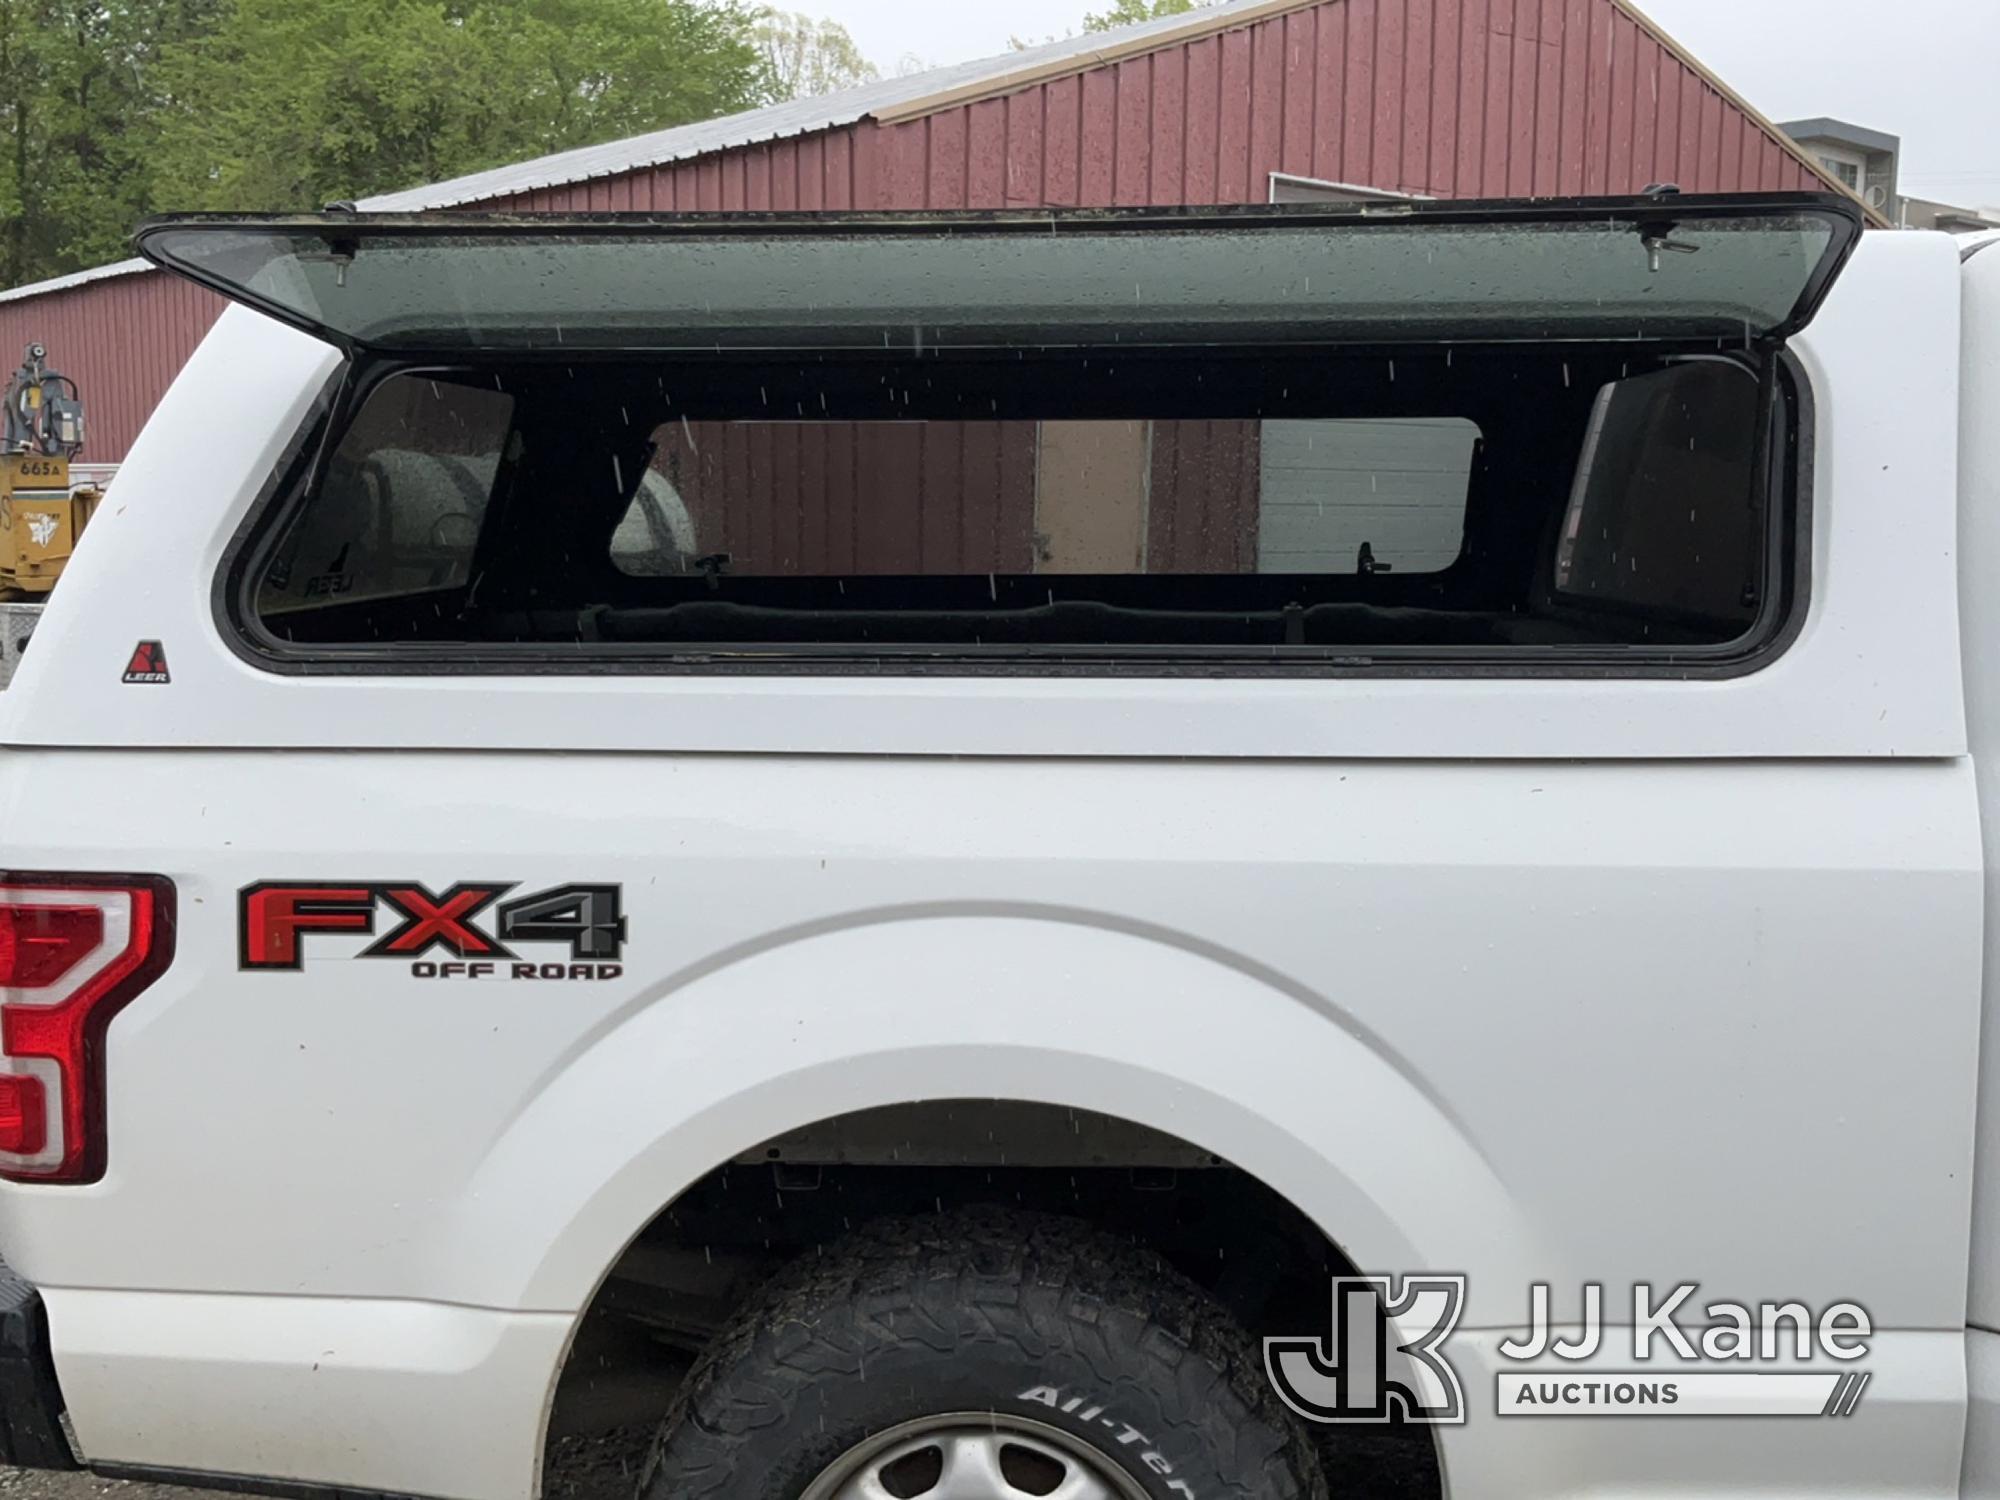 (Charlotte, NC) 2018 Ford F150 4x4 Extended-Cab Pickup Truck Runs & Moves) (Check Engine Light On, A